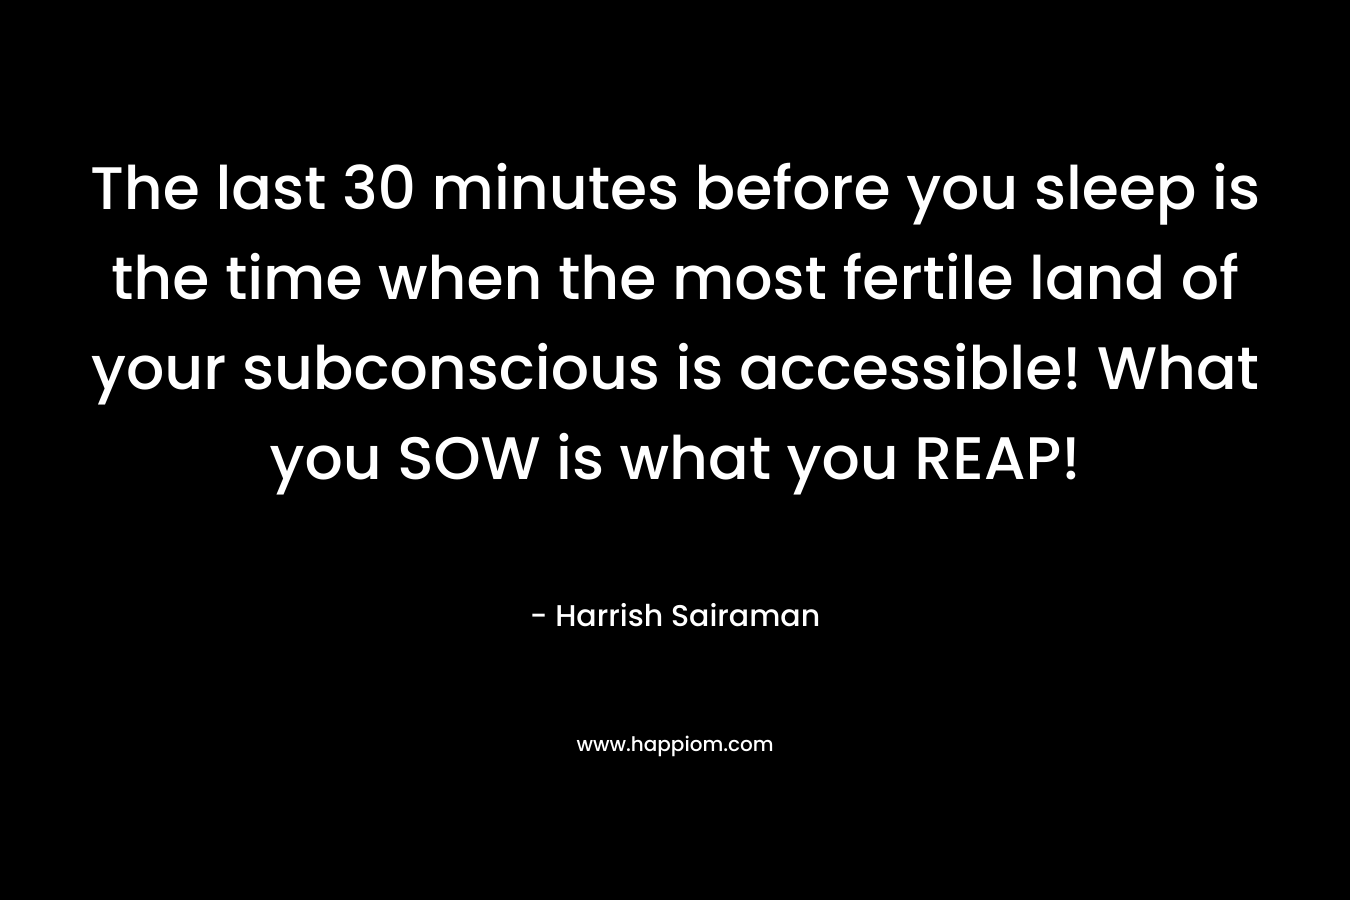 The last 30 minutes before you sleep is the time when the most fertile land of your subconscious is accessible! What you SOW is what you REAP!